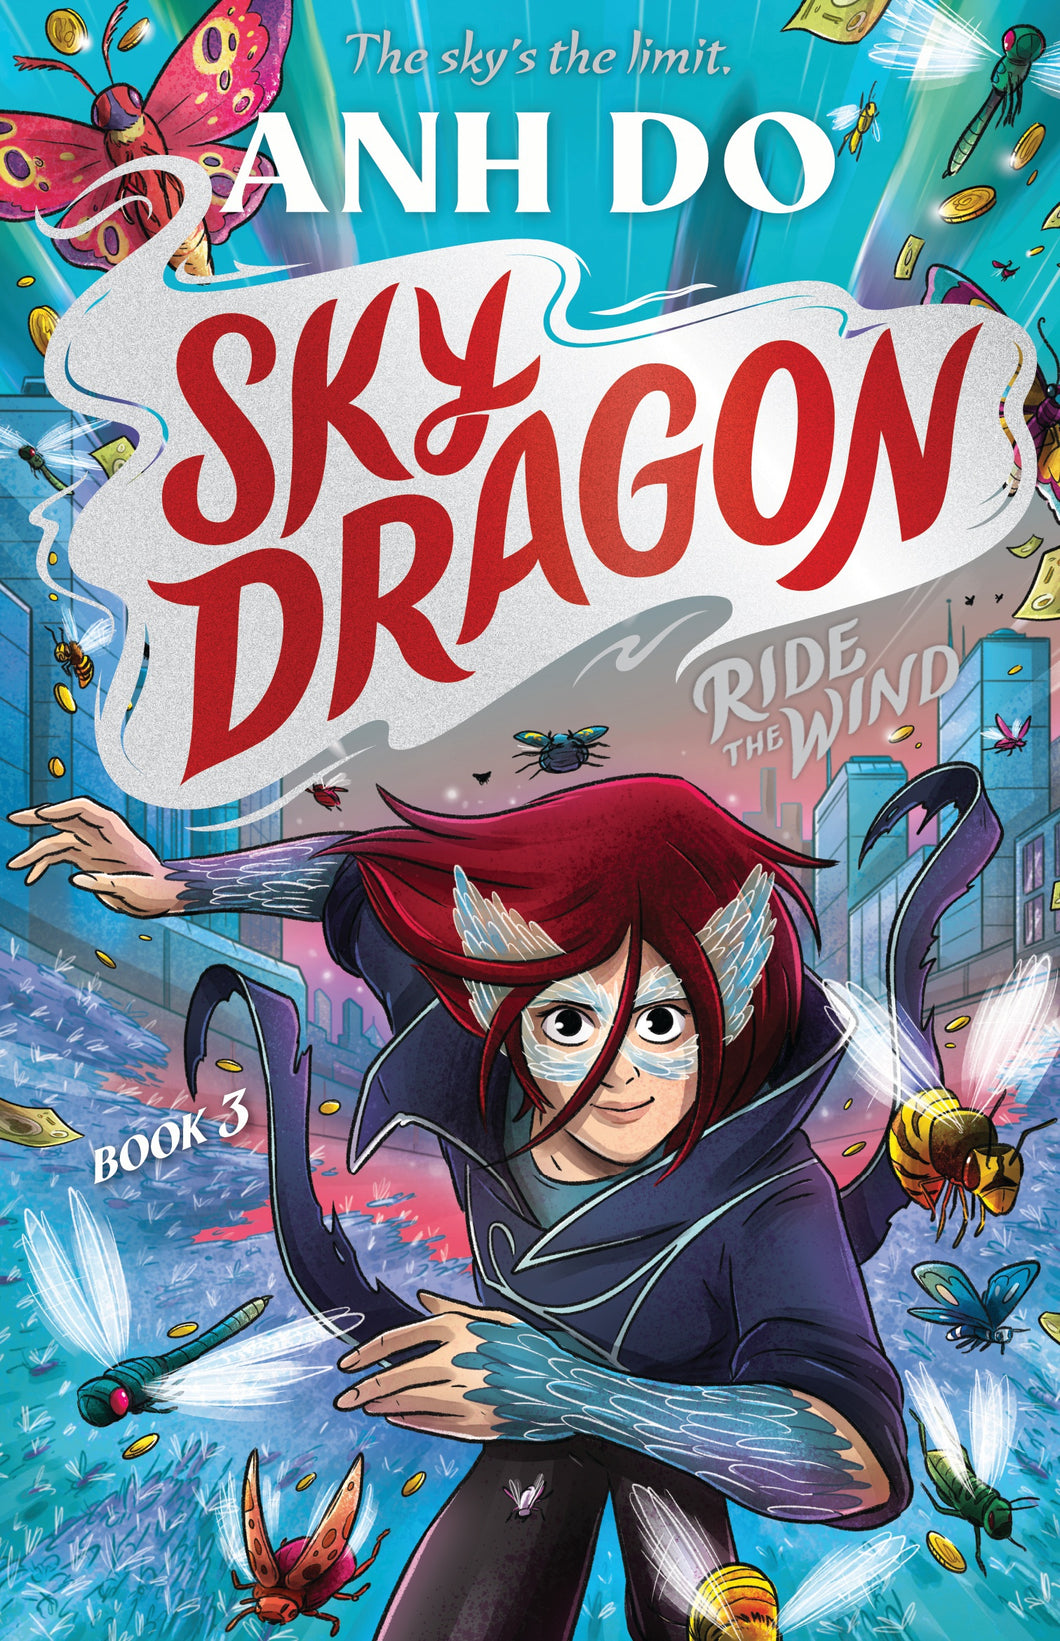 Sky Dragon 3: Ride the Wind by Anh Do